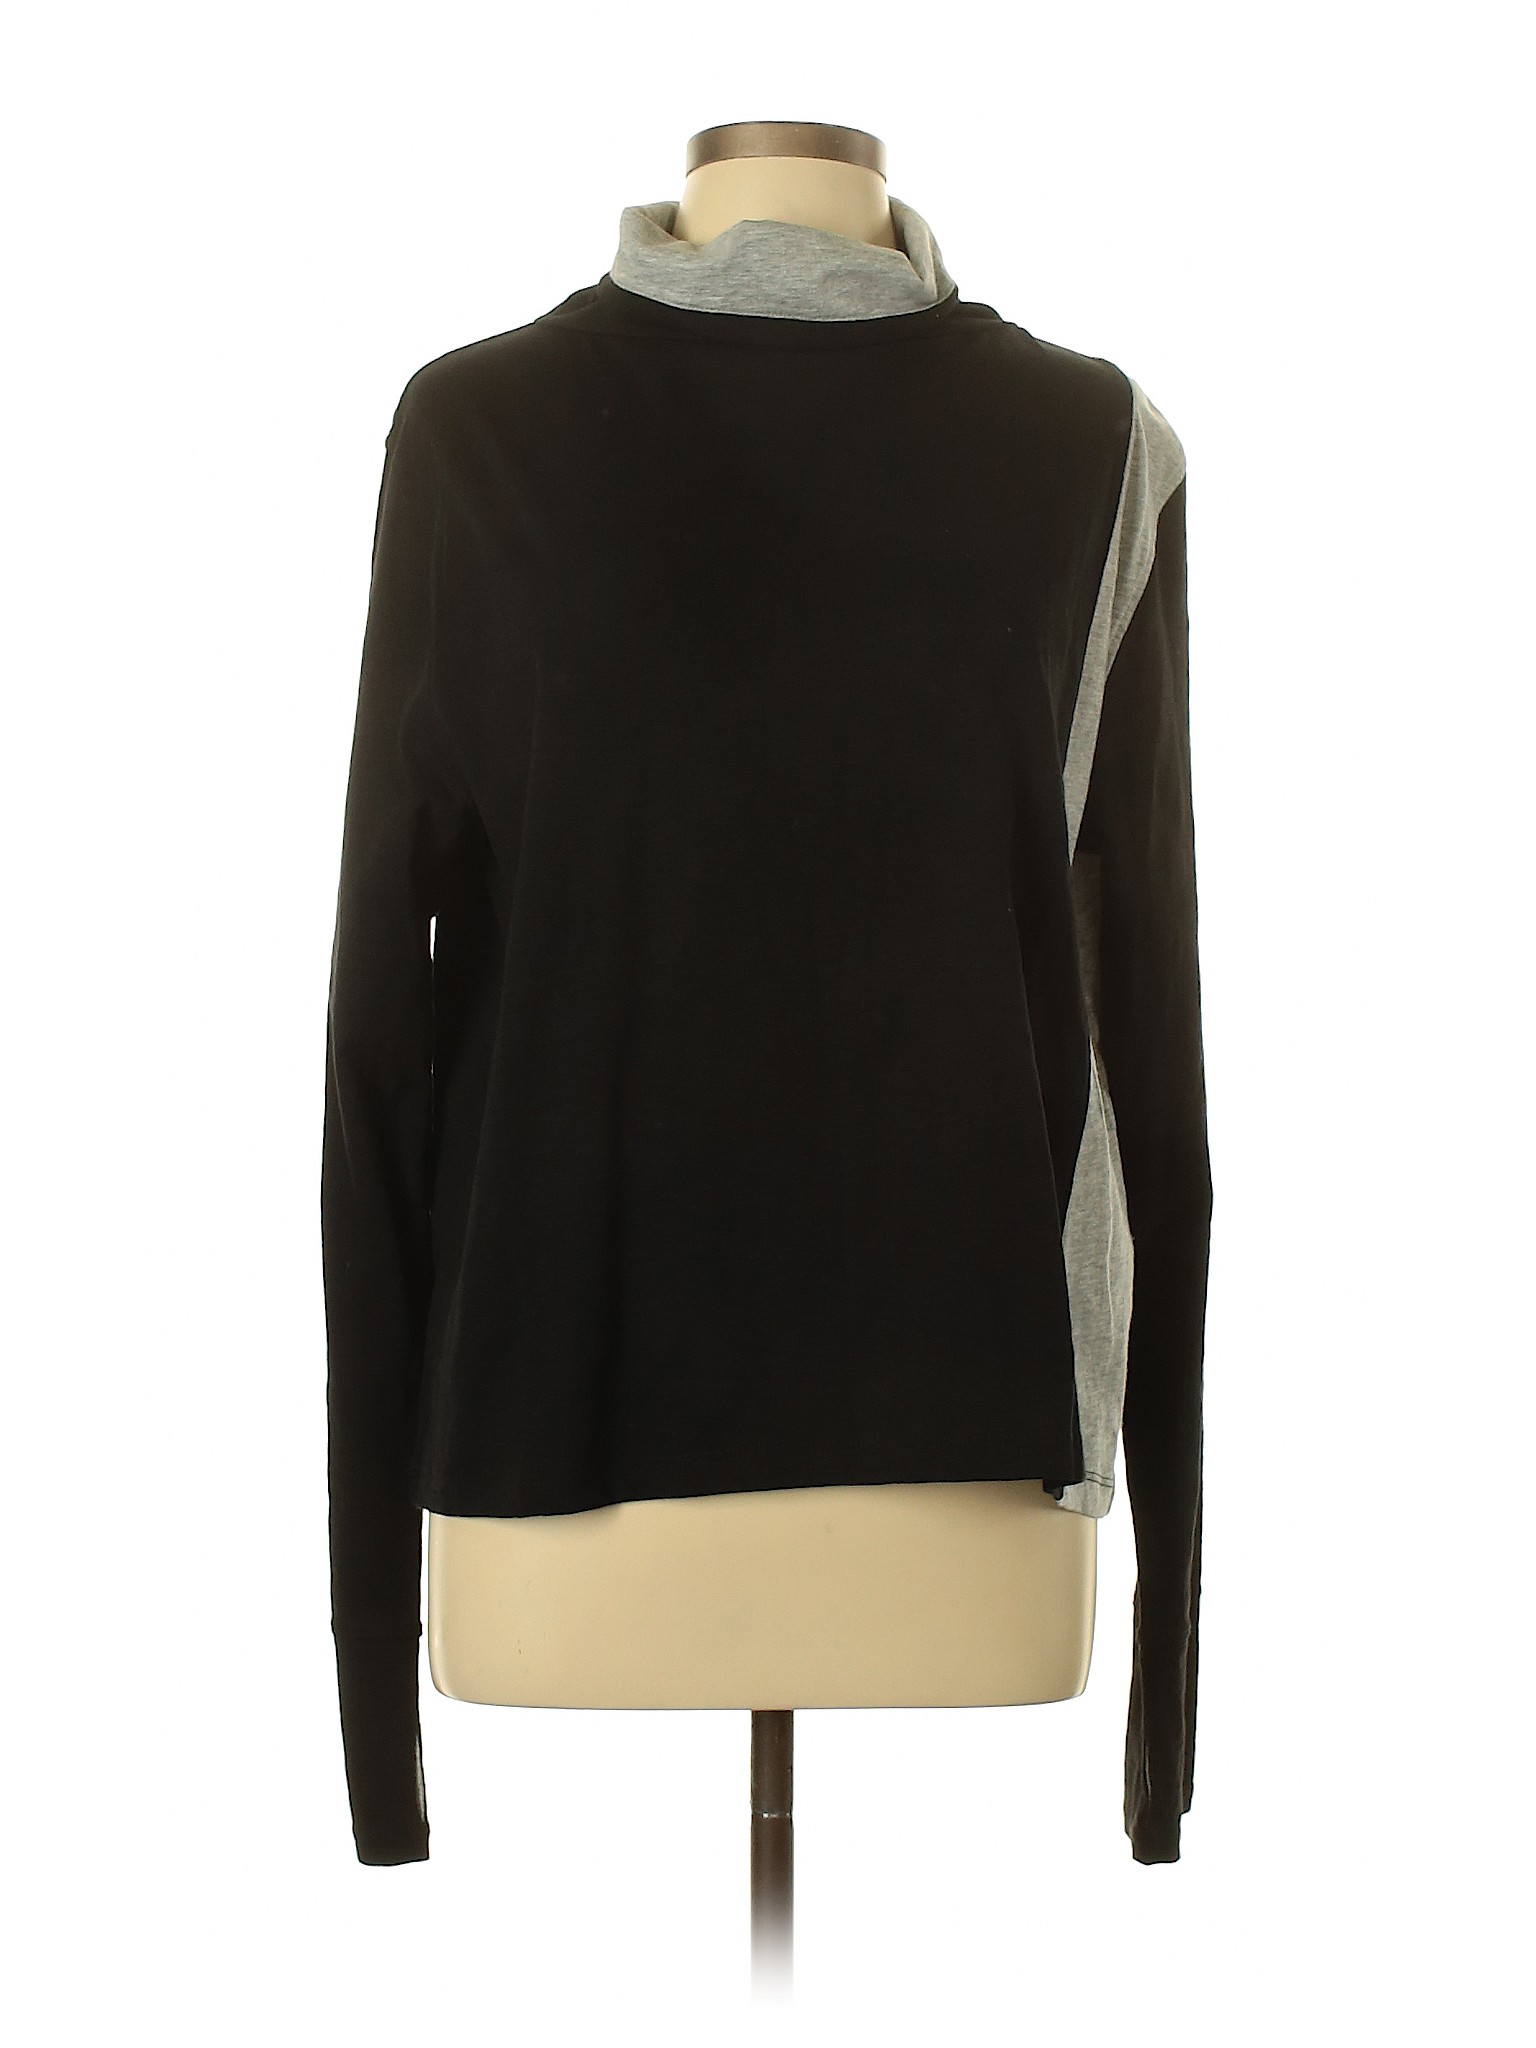 Lisa Todd 100% Cotton Solid Black Turtleneck Sweater Size XL - 92% off ...